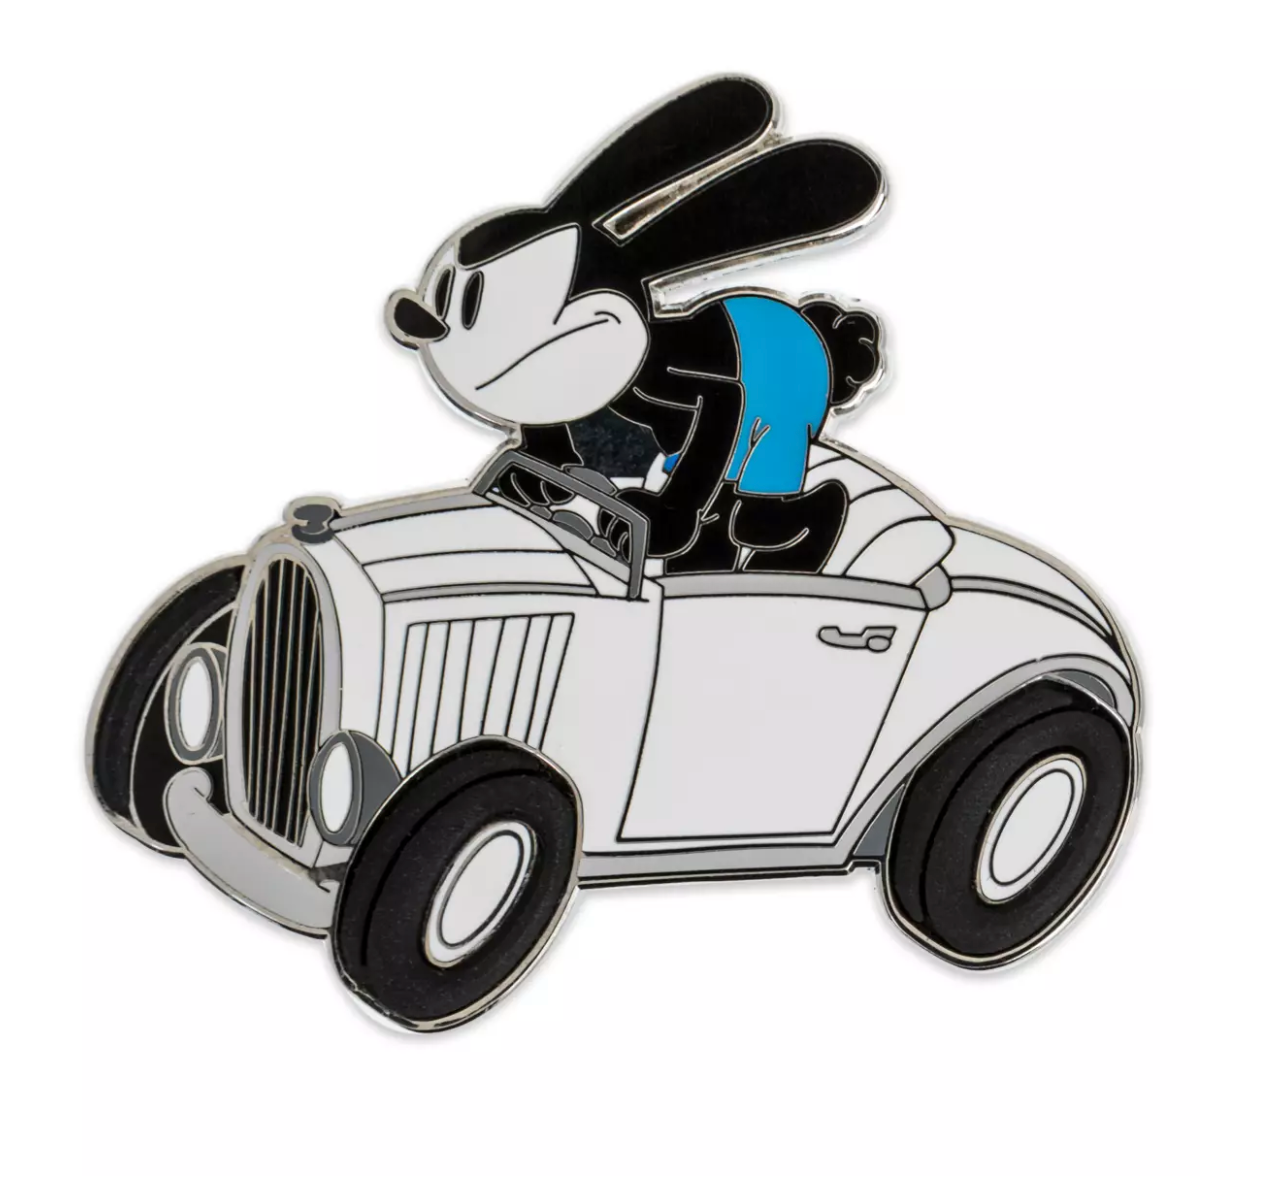 Disney 100 Celebration Oswald the Lucky Rabbit Car Pin New with Card